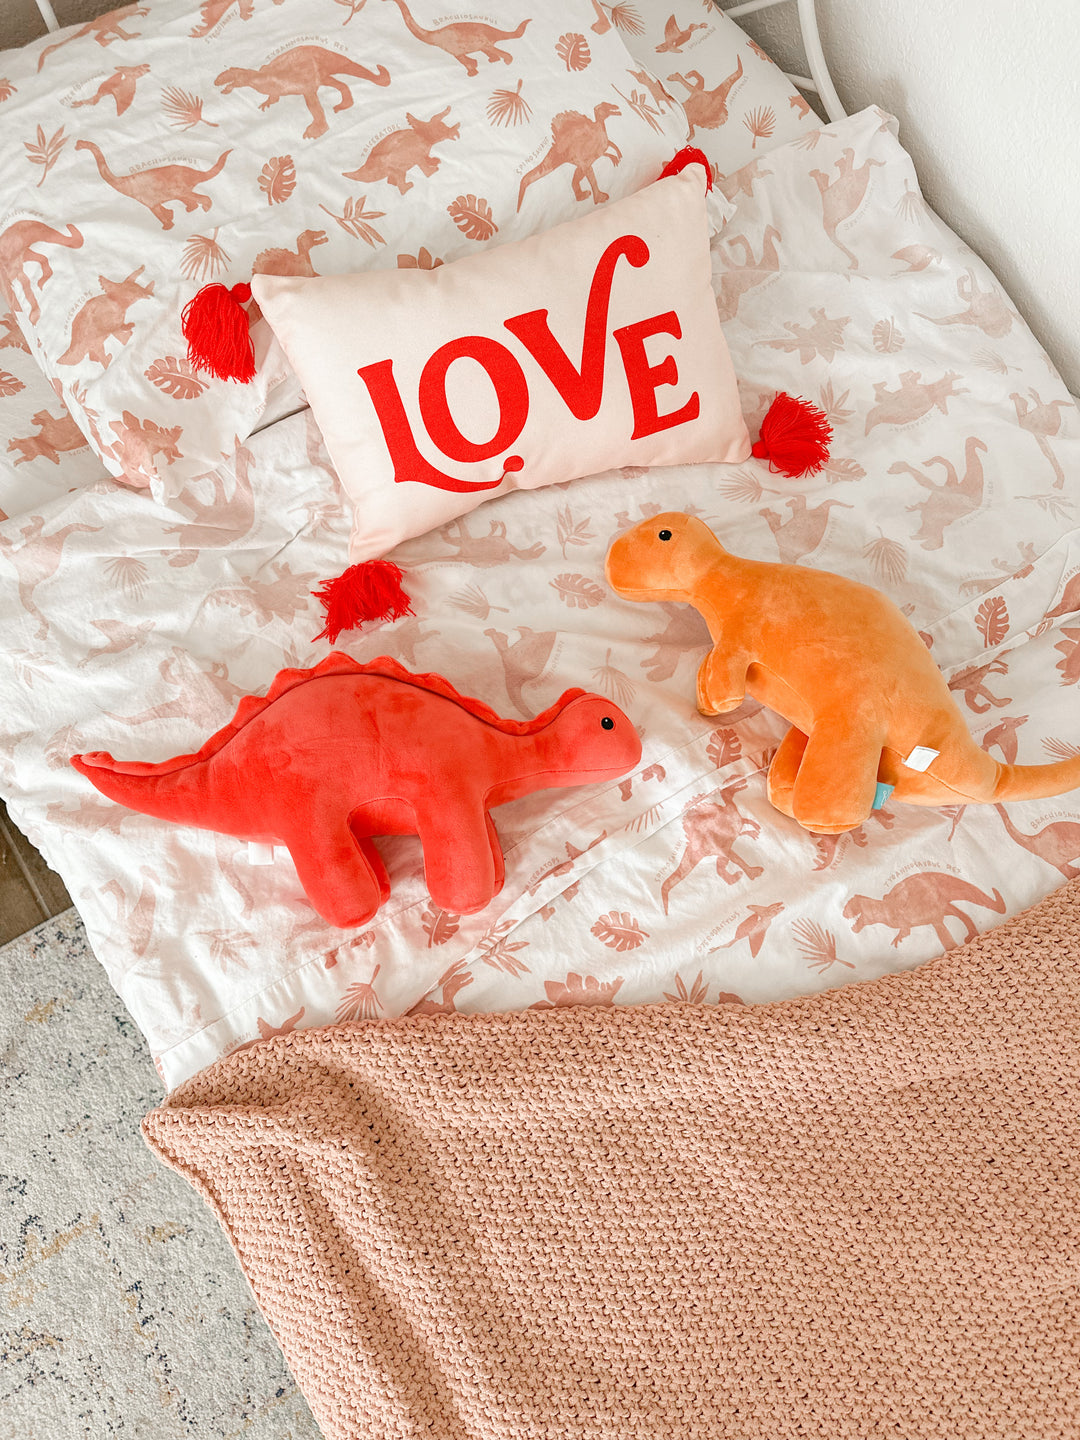 @theheinrichhouse photo from instagram - dinosaur plush toys laying in boys' bed